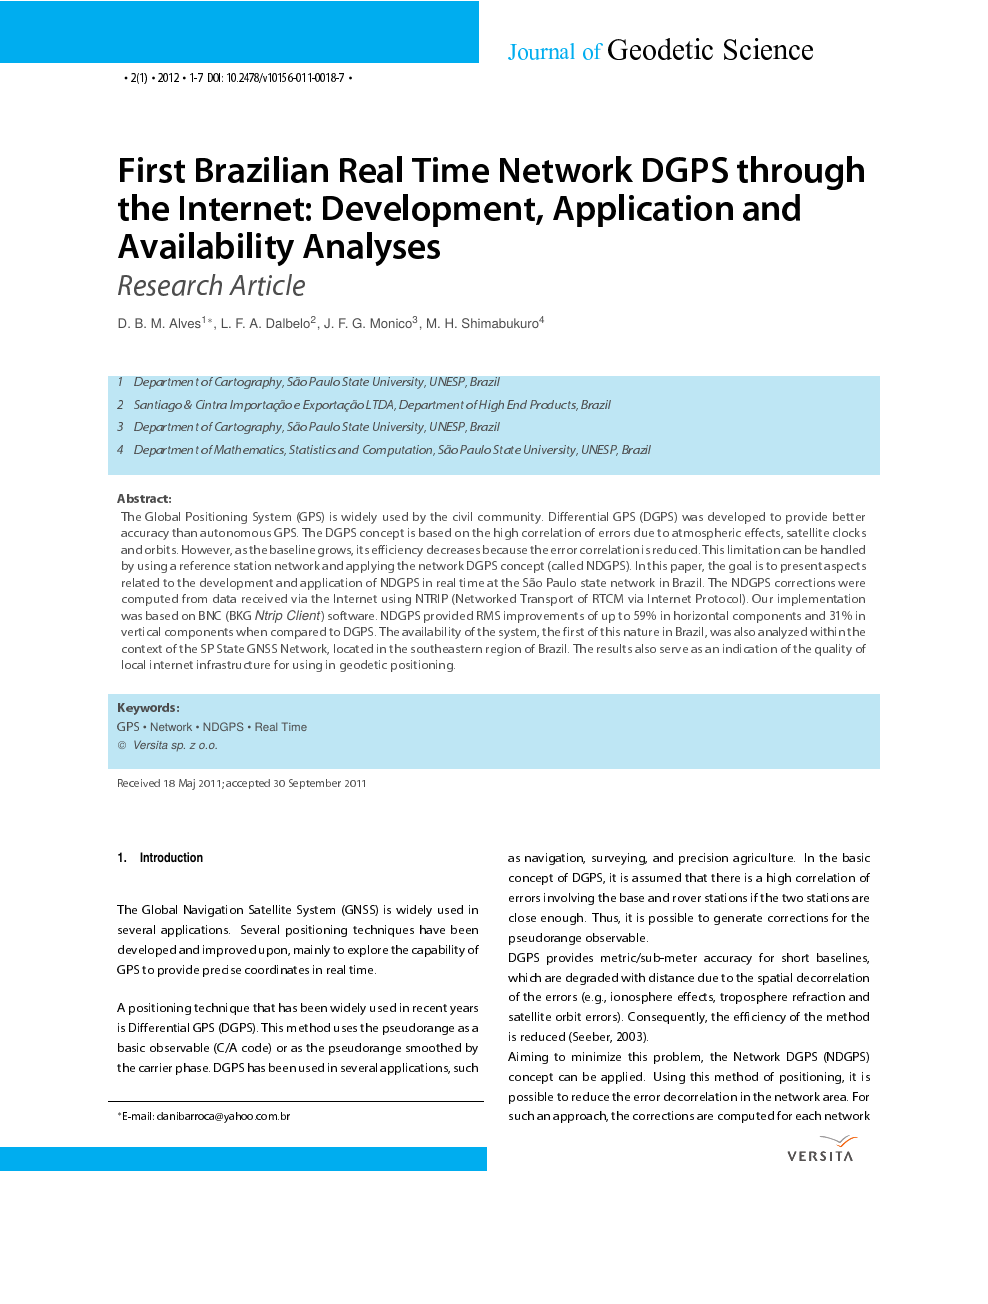 First Brazilian Real Time Network Dgps Through The Internet Development Application And Availability Analyses Topic Of Research Paper In Earth And Related Environmental Sciences Download Scholarly Article Pdf And Read For